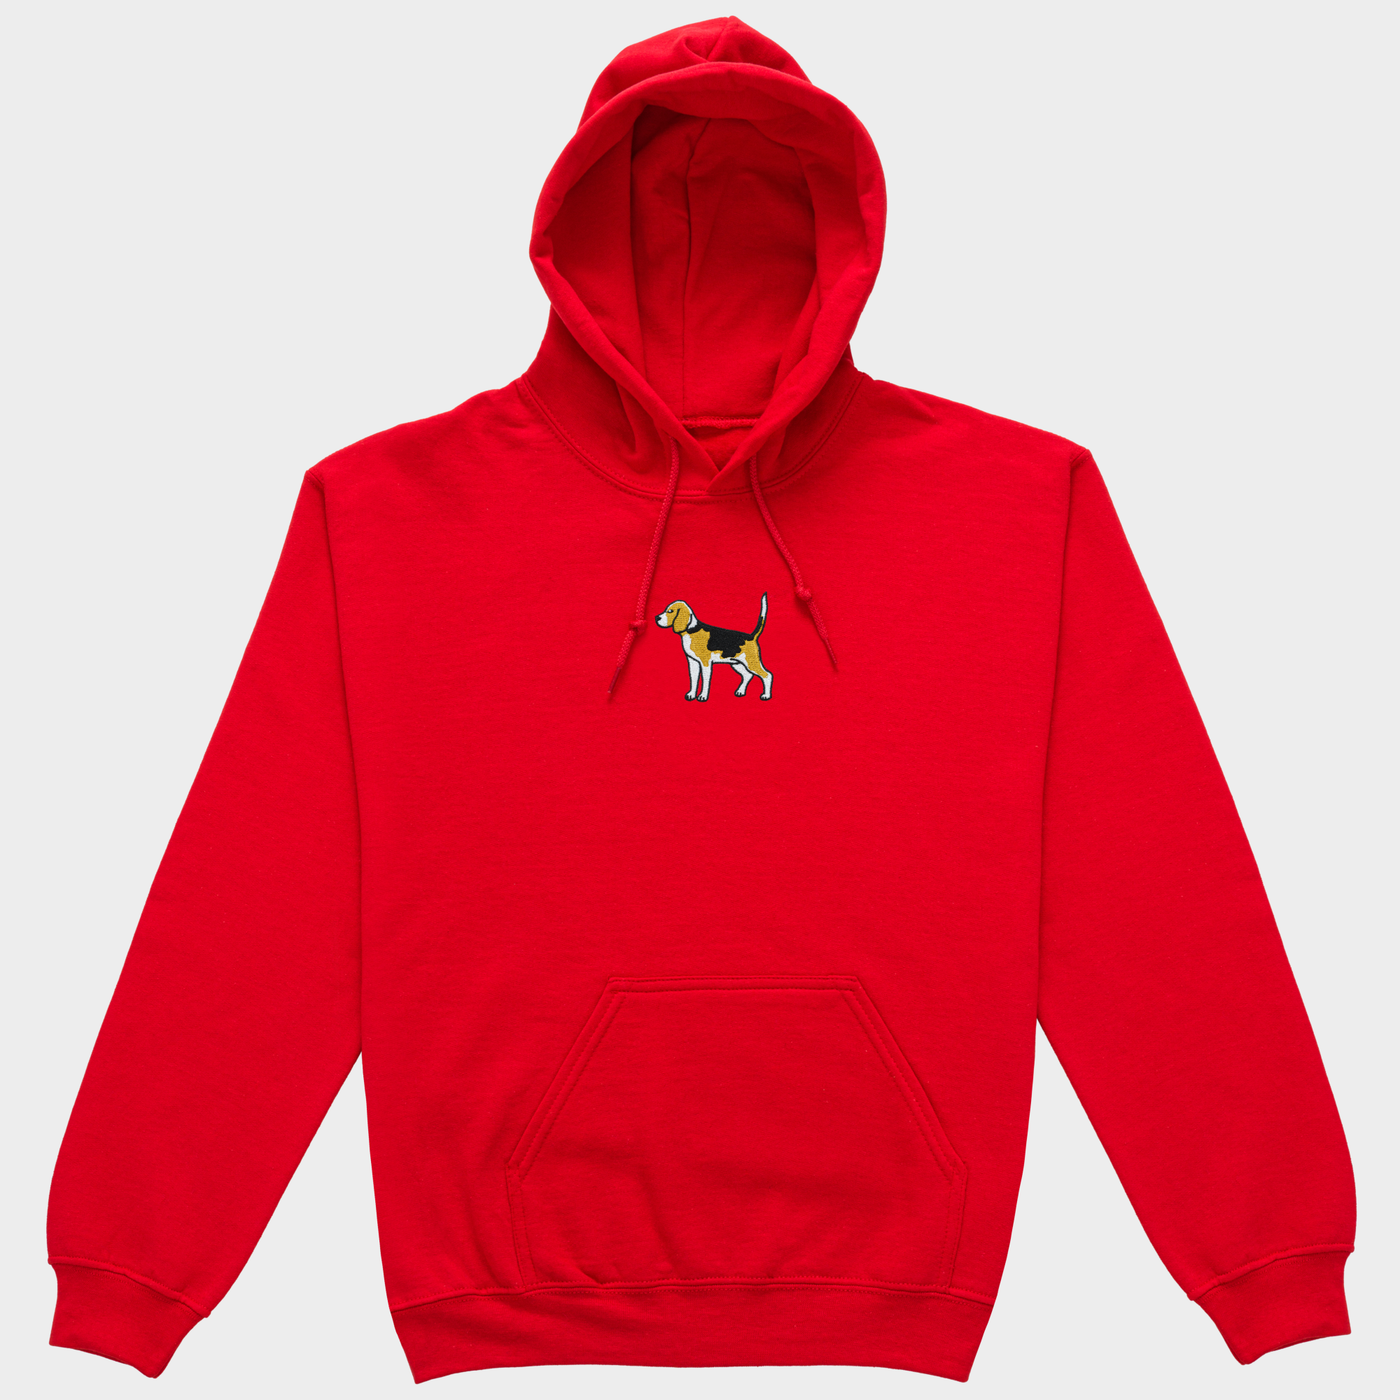 Bobby's Planet Women's Embroidered Beagle Hoodie from Paws Dog Cat Animals Collection in Red Color#color_red